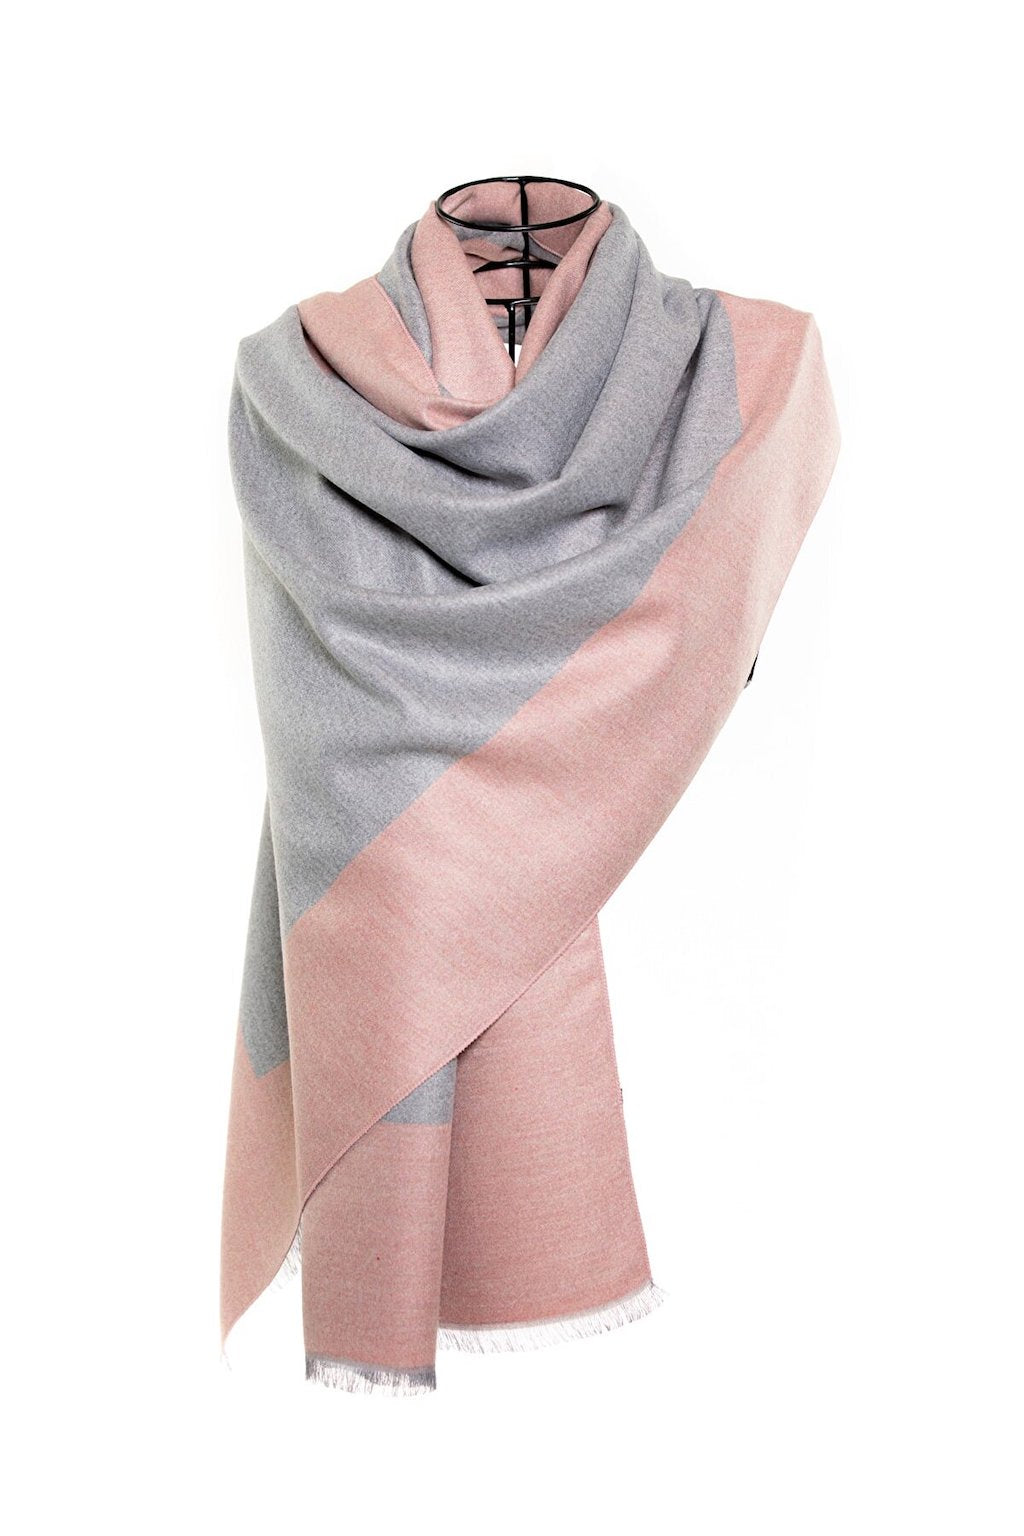 Reversible Mo-shmere Double Rectangle Shawl - Light Pink Gray